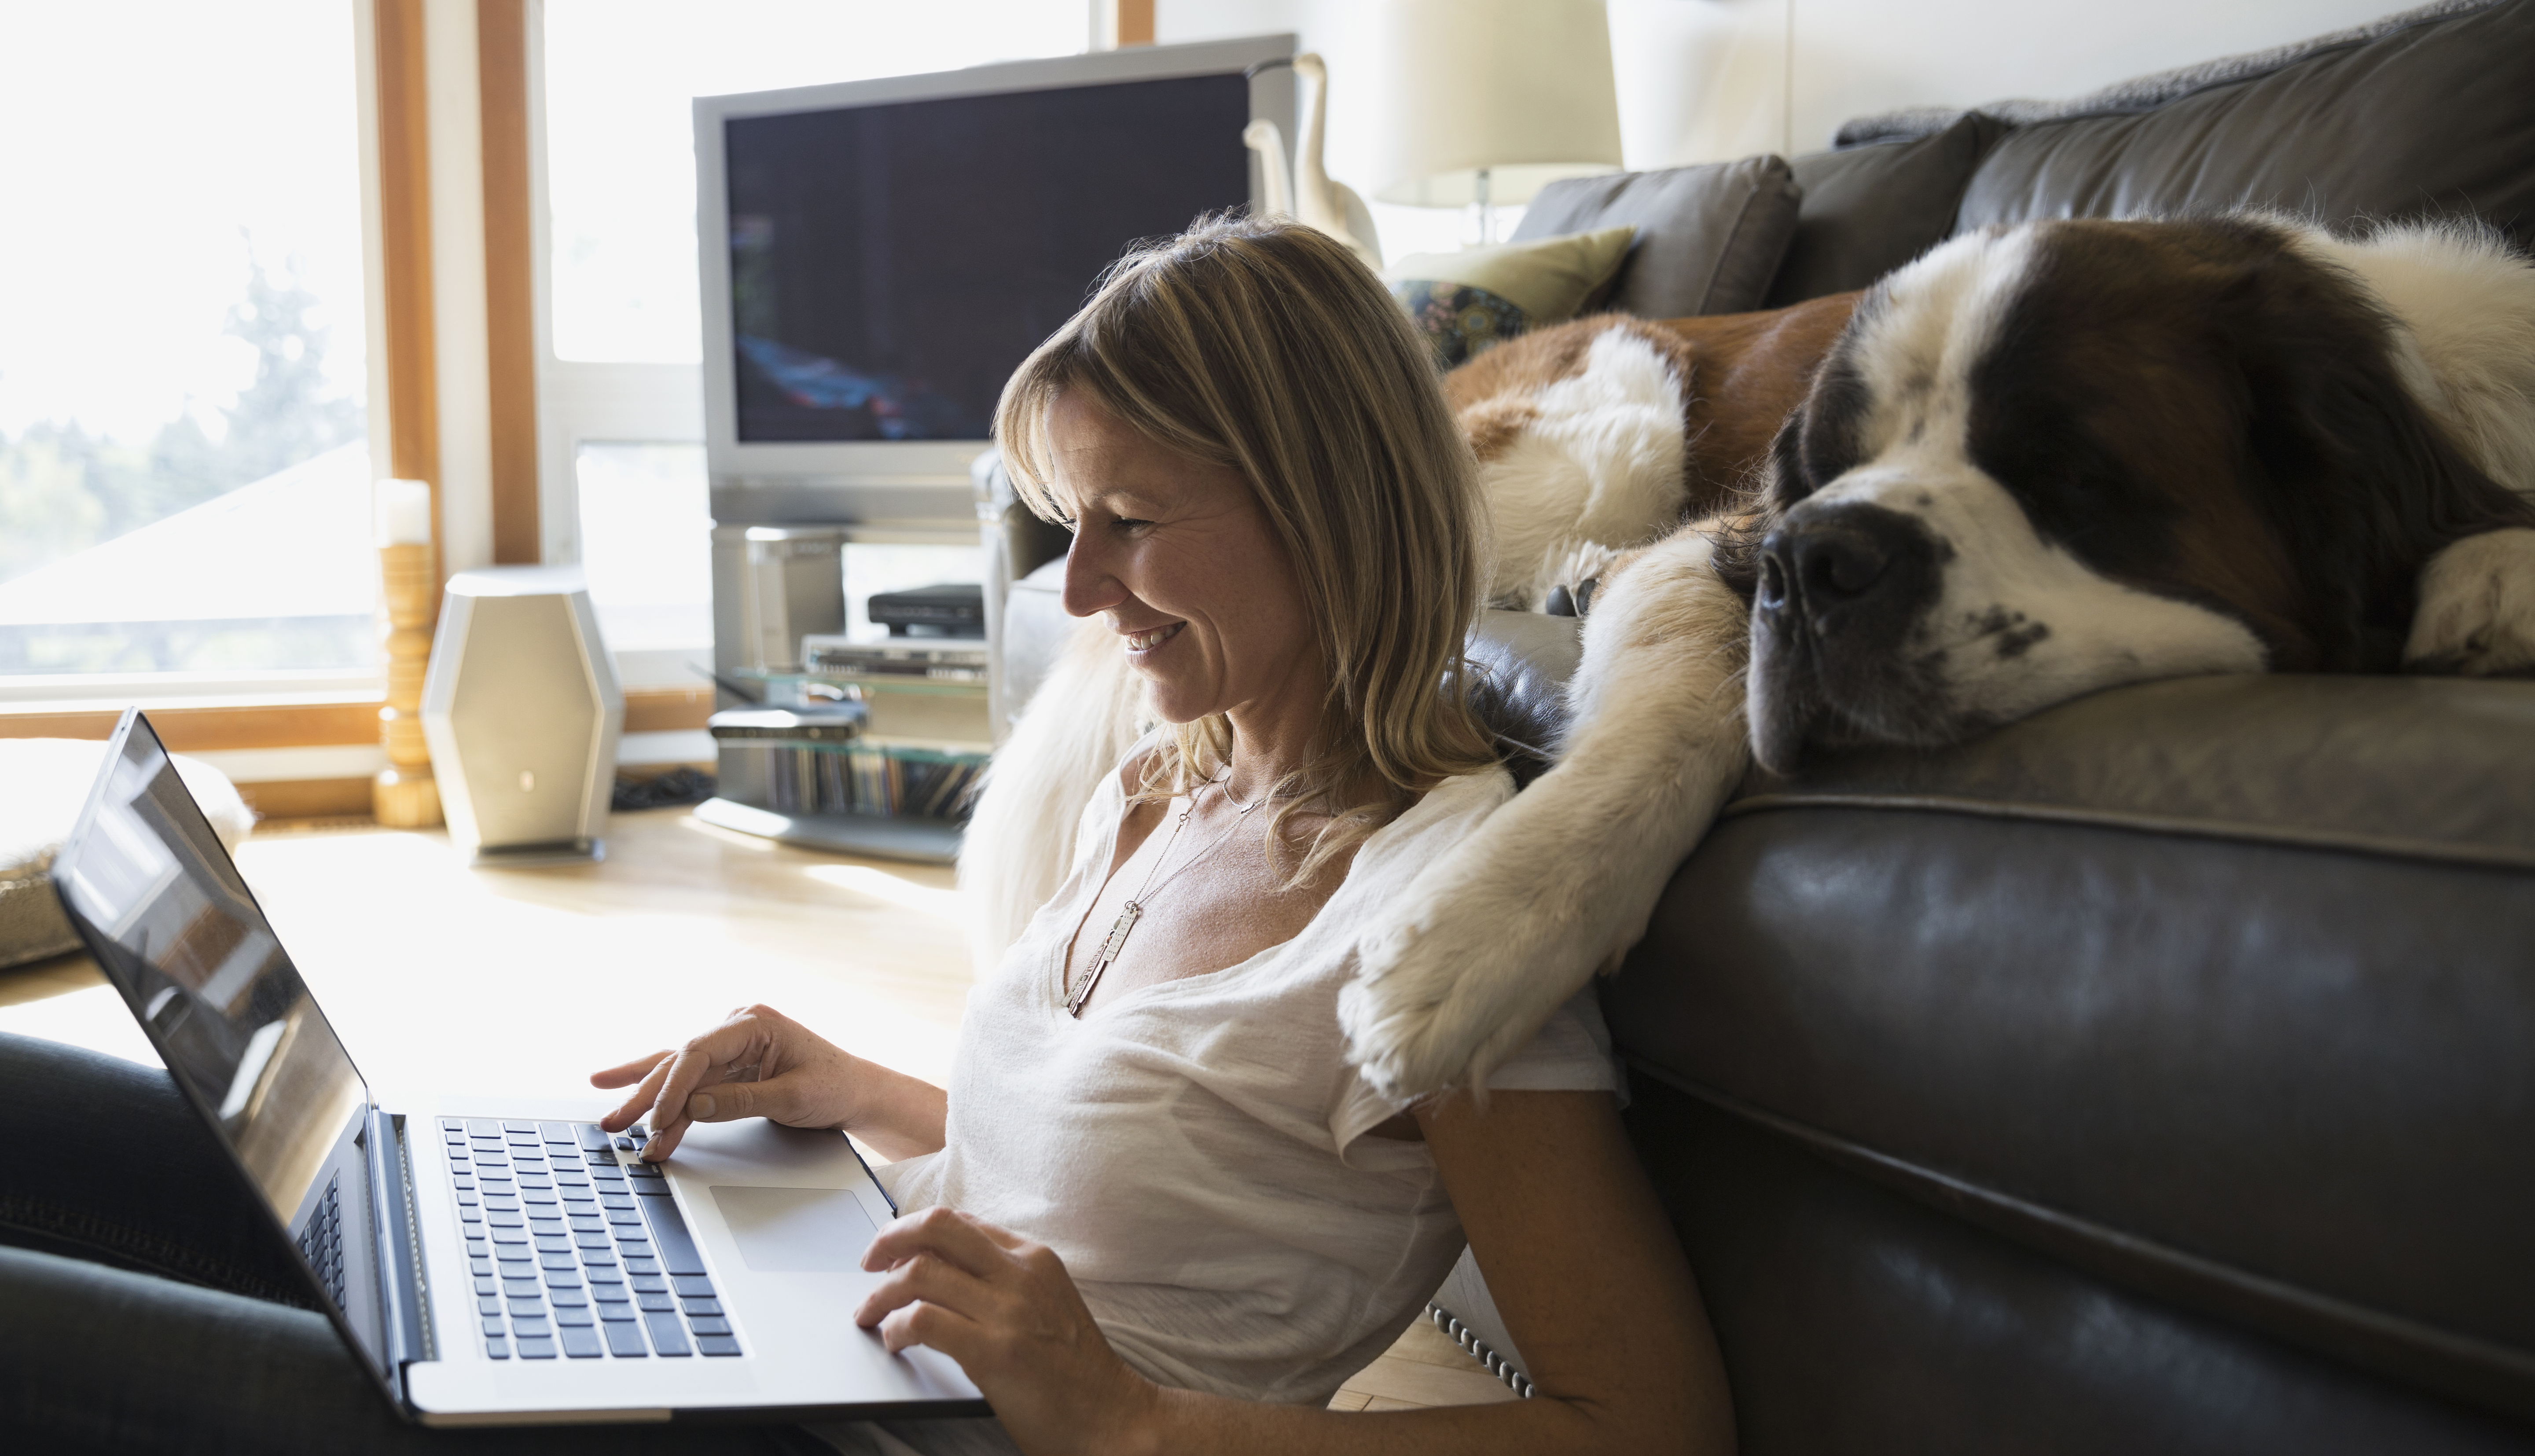 Women works on her computer with her dog laying on the couch